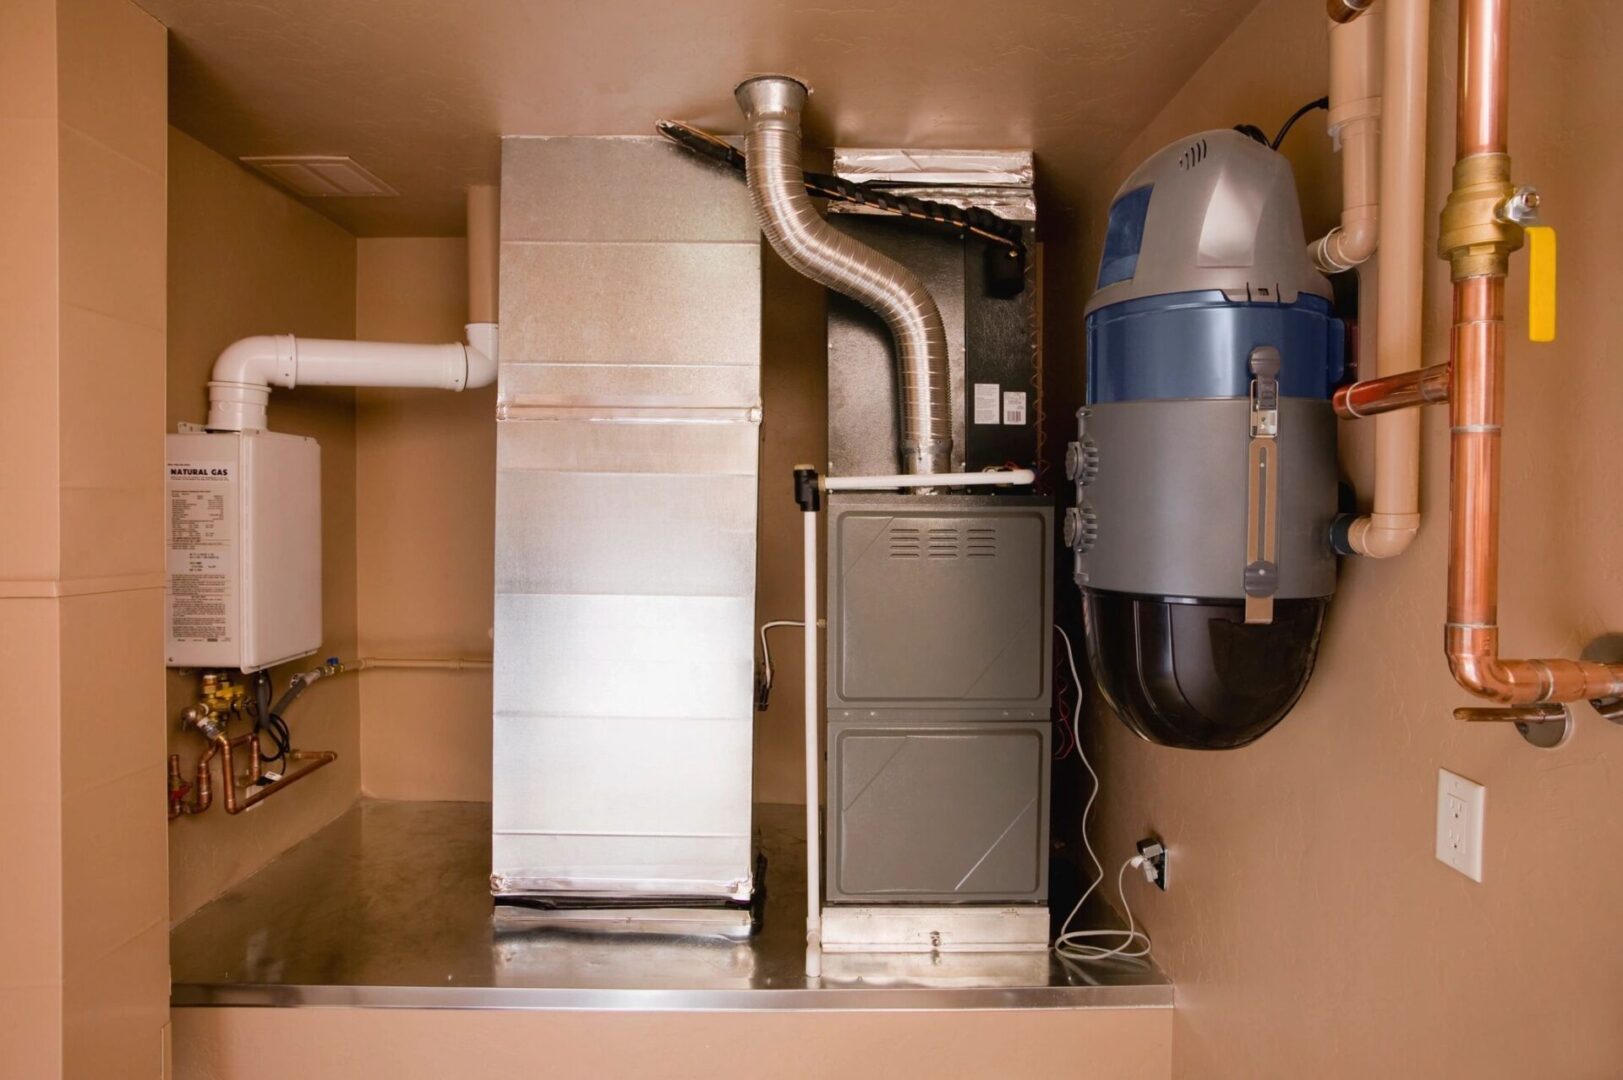 A gas furnace and air conditioner in a room.